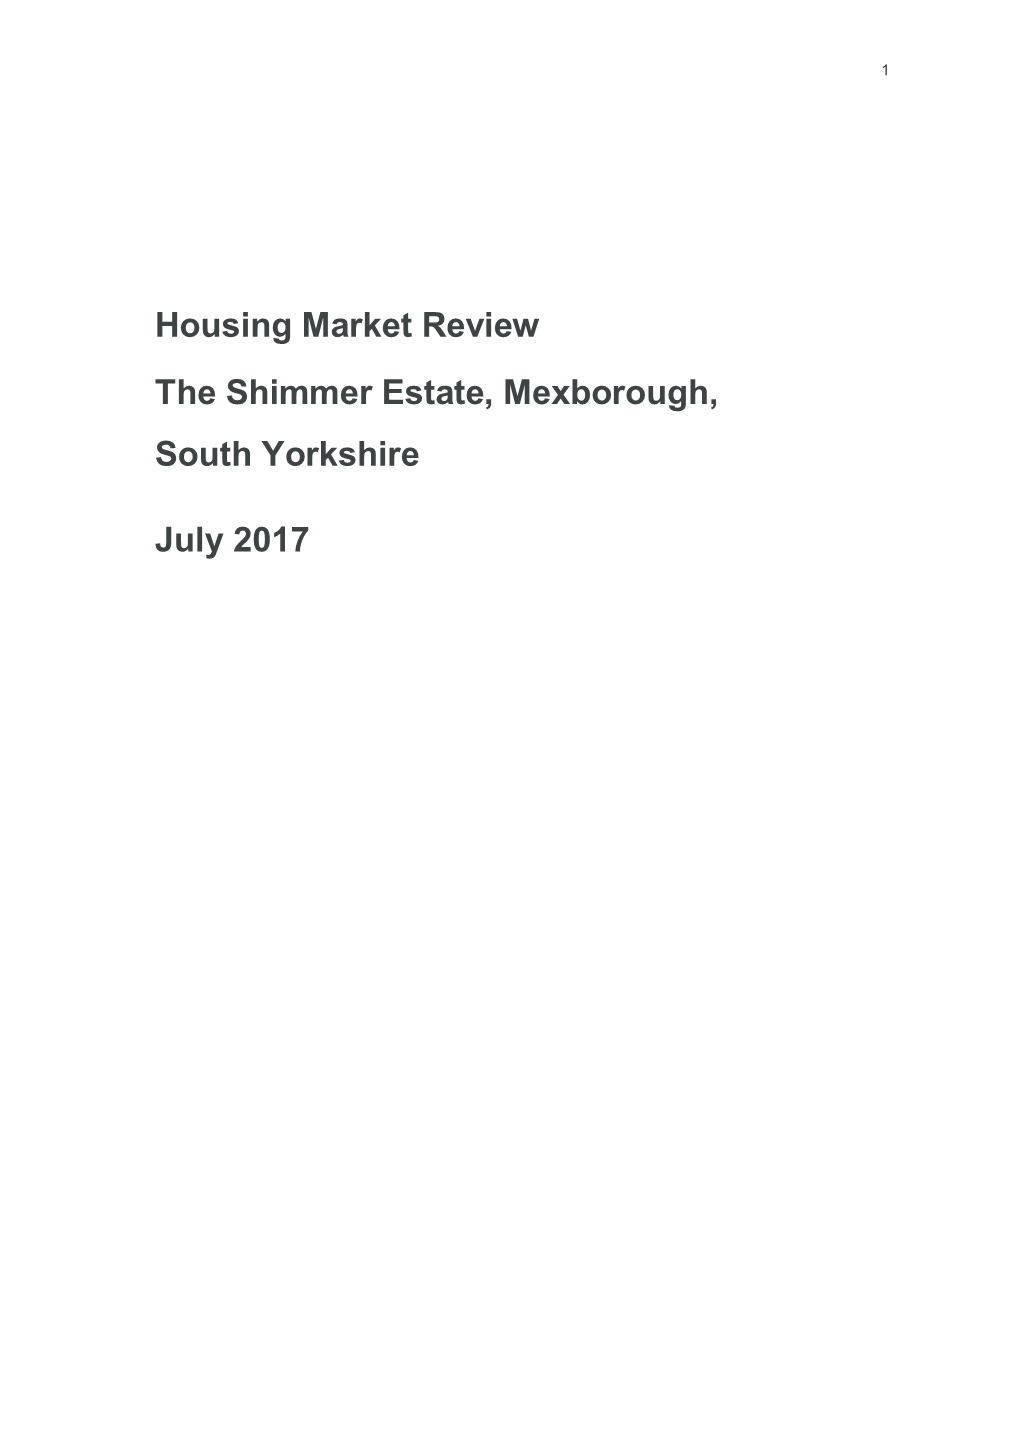 Housing Market Review: the Shimmer Estate, Mexborough, South Yorkshire